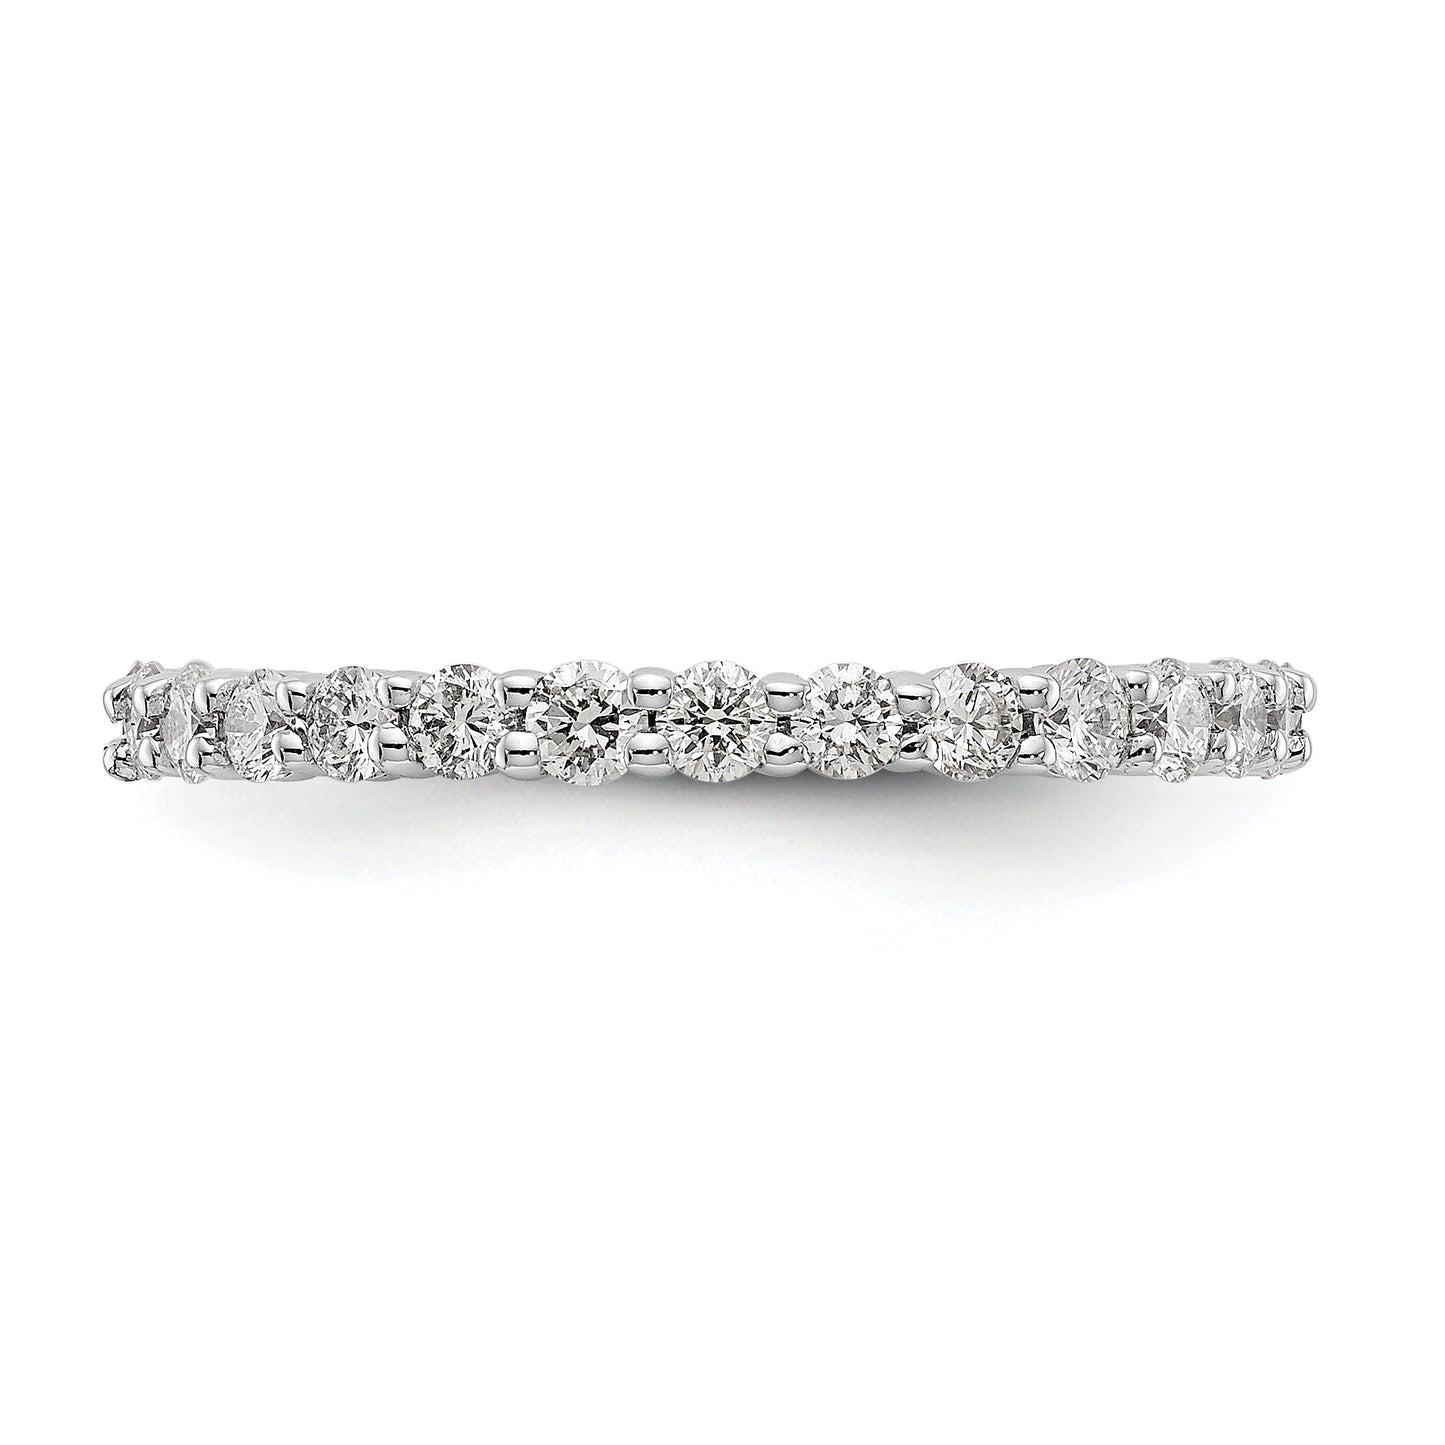 Solid Real 14k White Gold Polished shared Prong 1ct CZ Eternity Wedding Band Ring